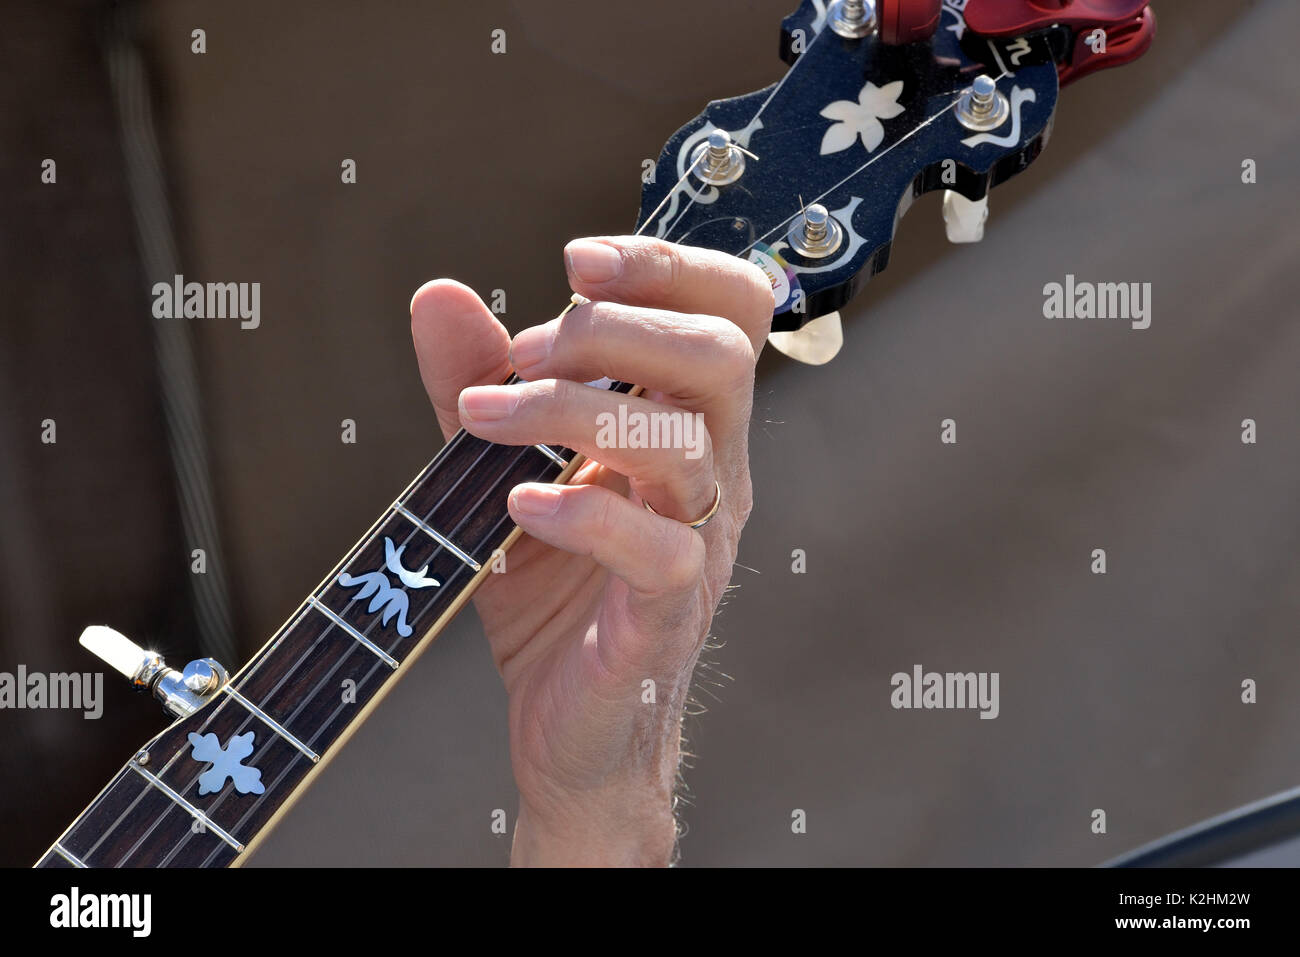 Banjo player hand on  fingerboard Stock Photo